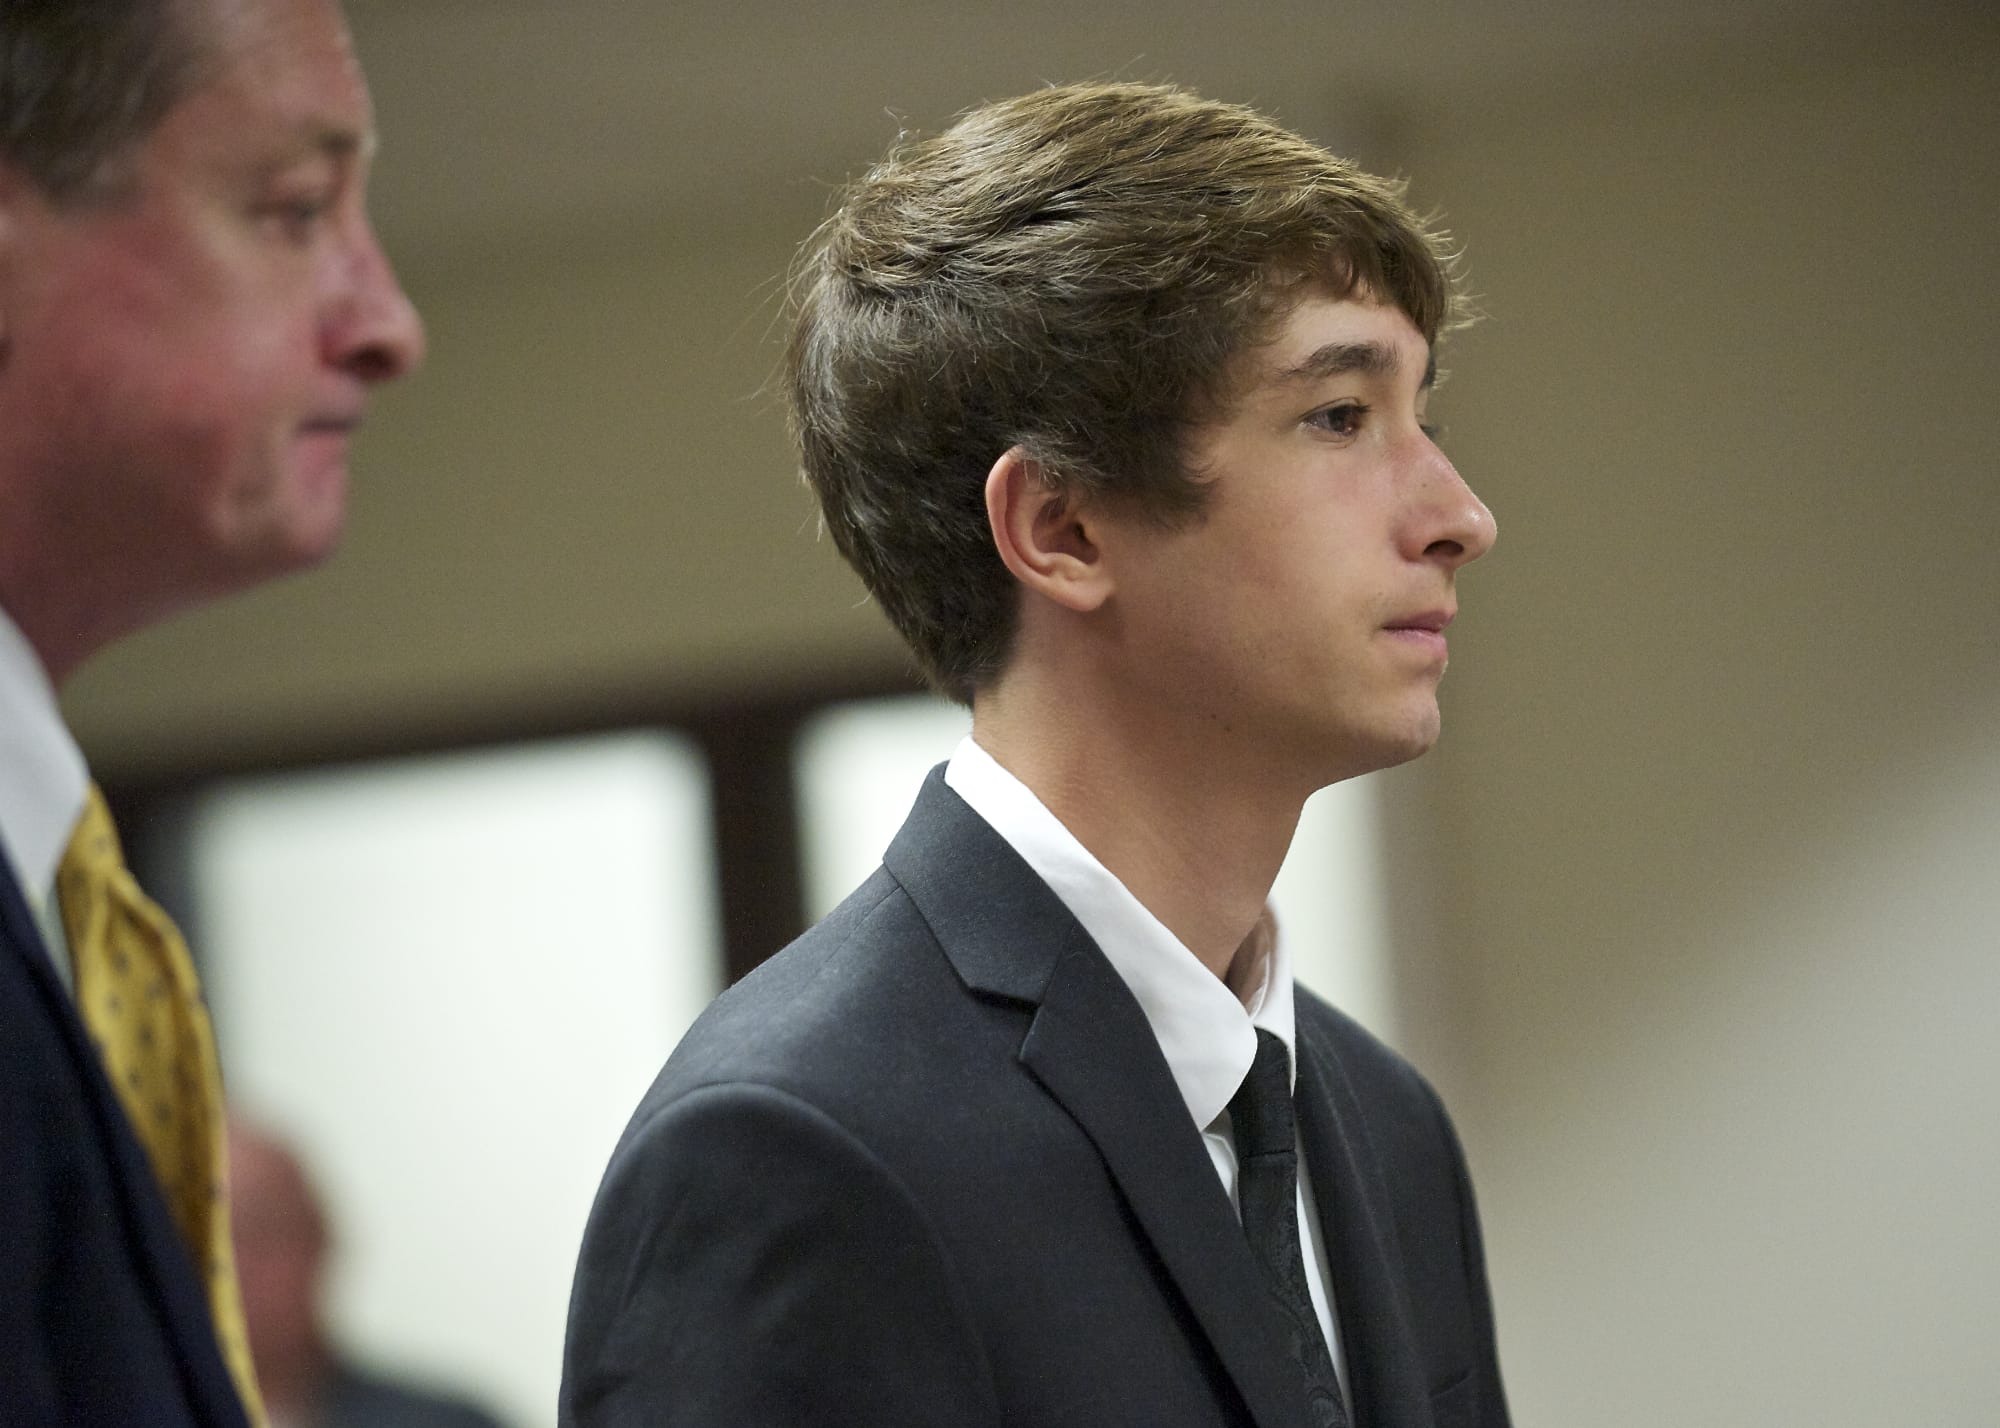 Dylan Mork pleads guilty on an arson charge in the 2013 Crestline Elementary School fire case in Clark County juvenile court on Thursday.